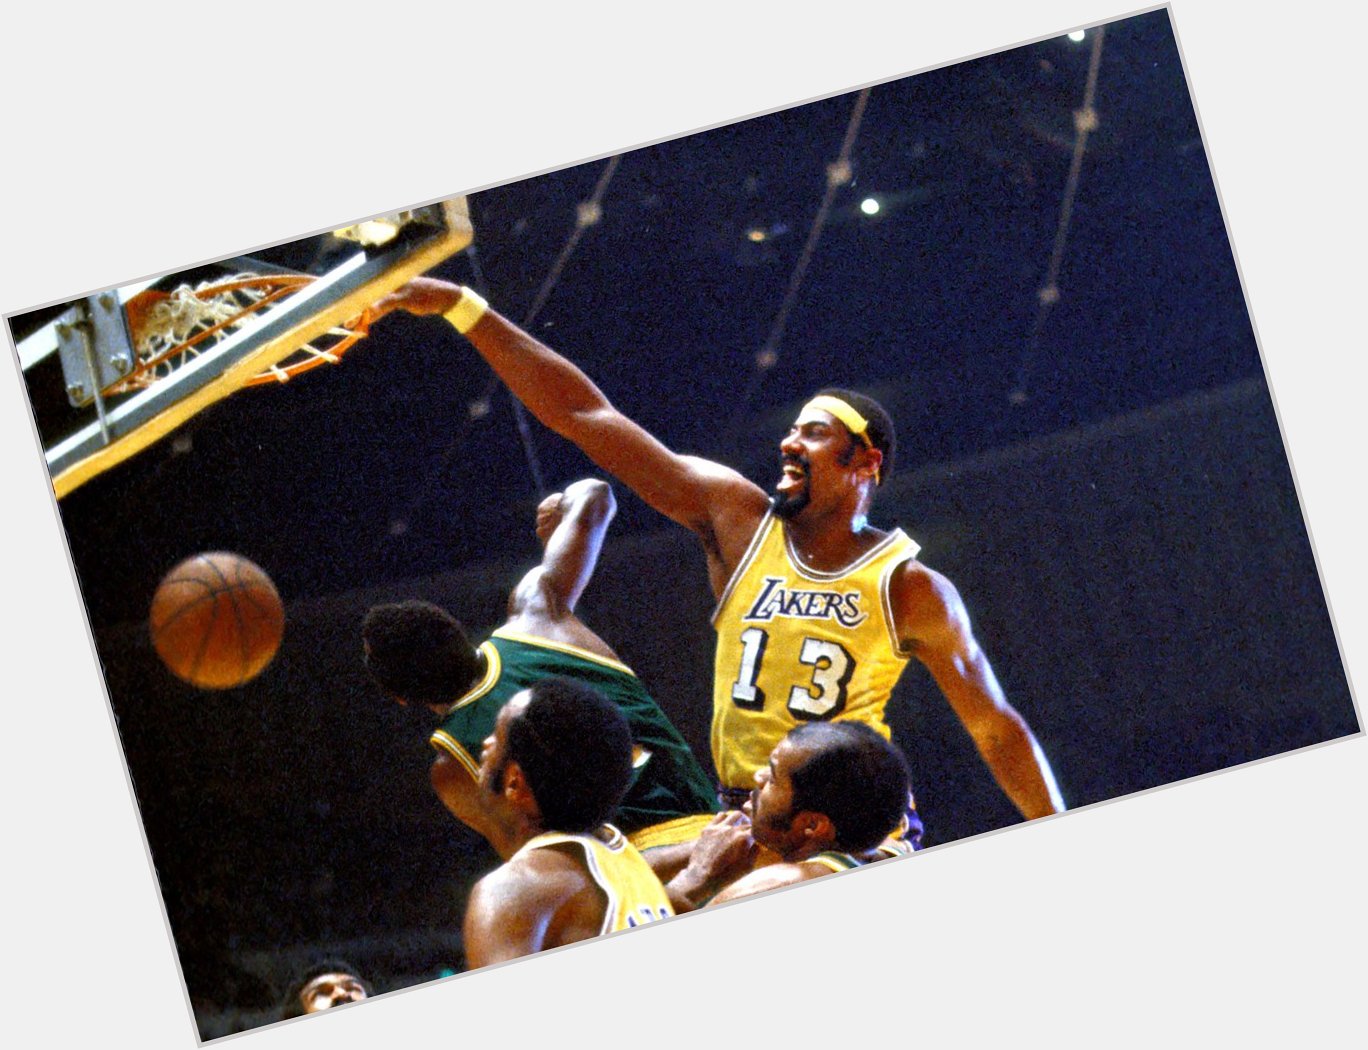 Happy Birthday to the great Wilt Chamberlain who would have been 81 today 